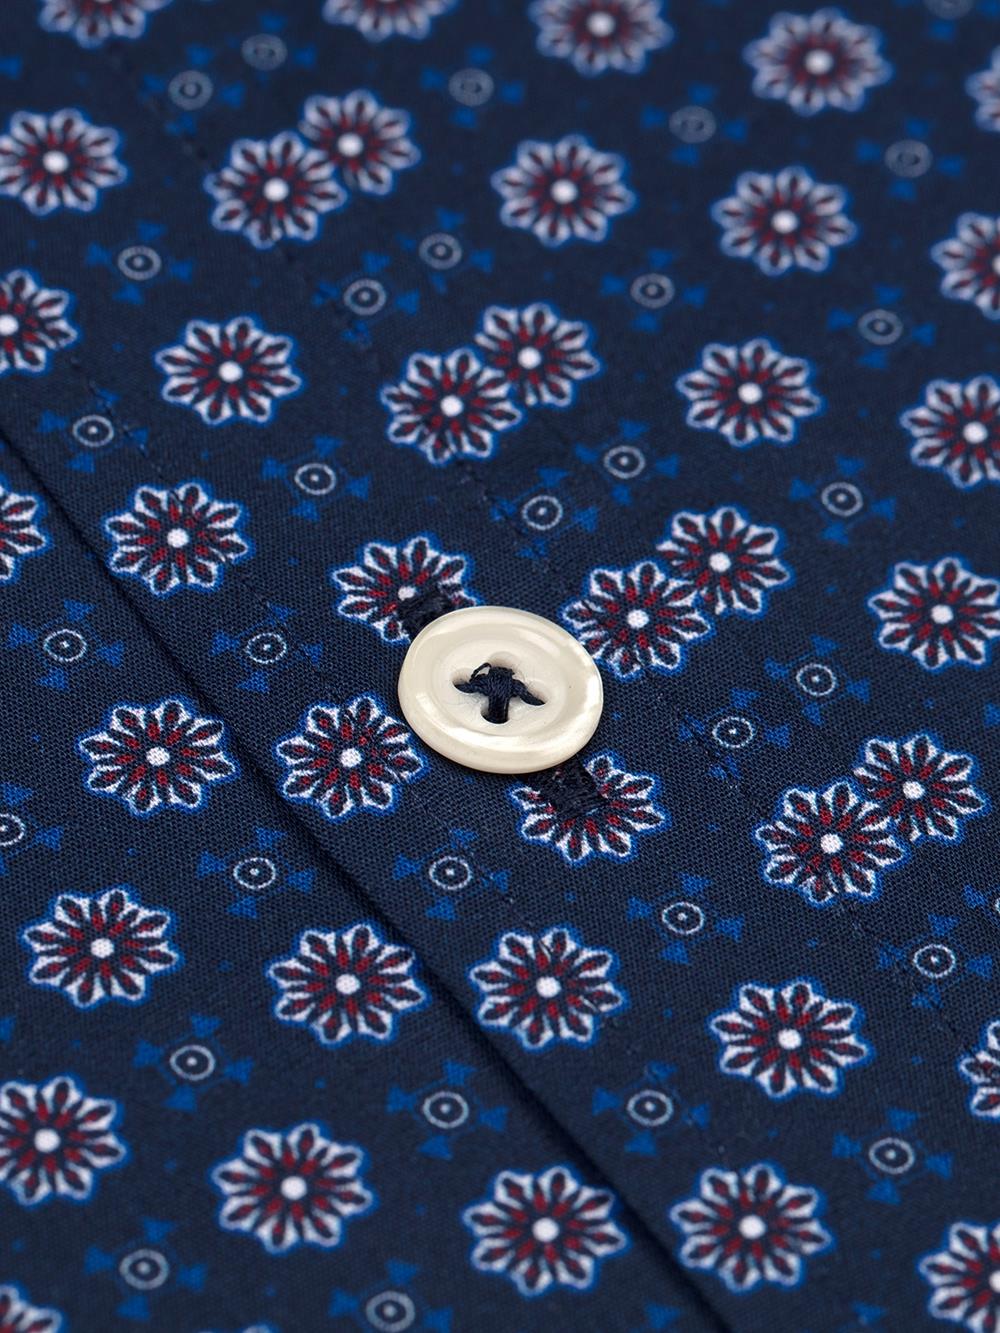 Elton navy blue slim fit shirt with printed pattern - Button-down collar